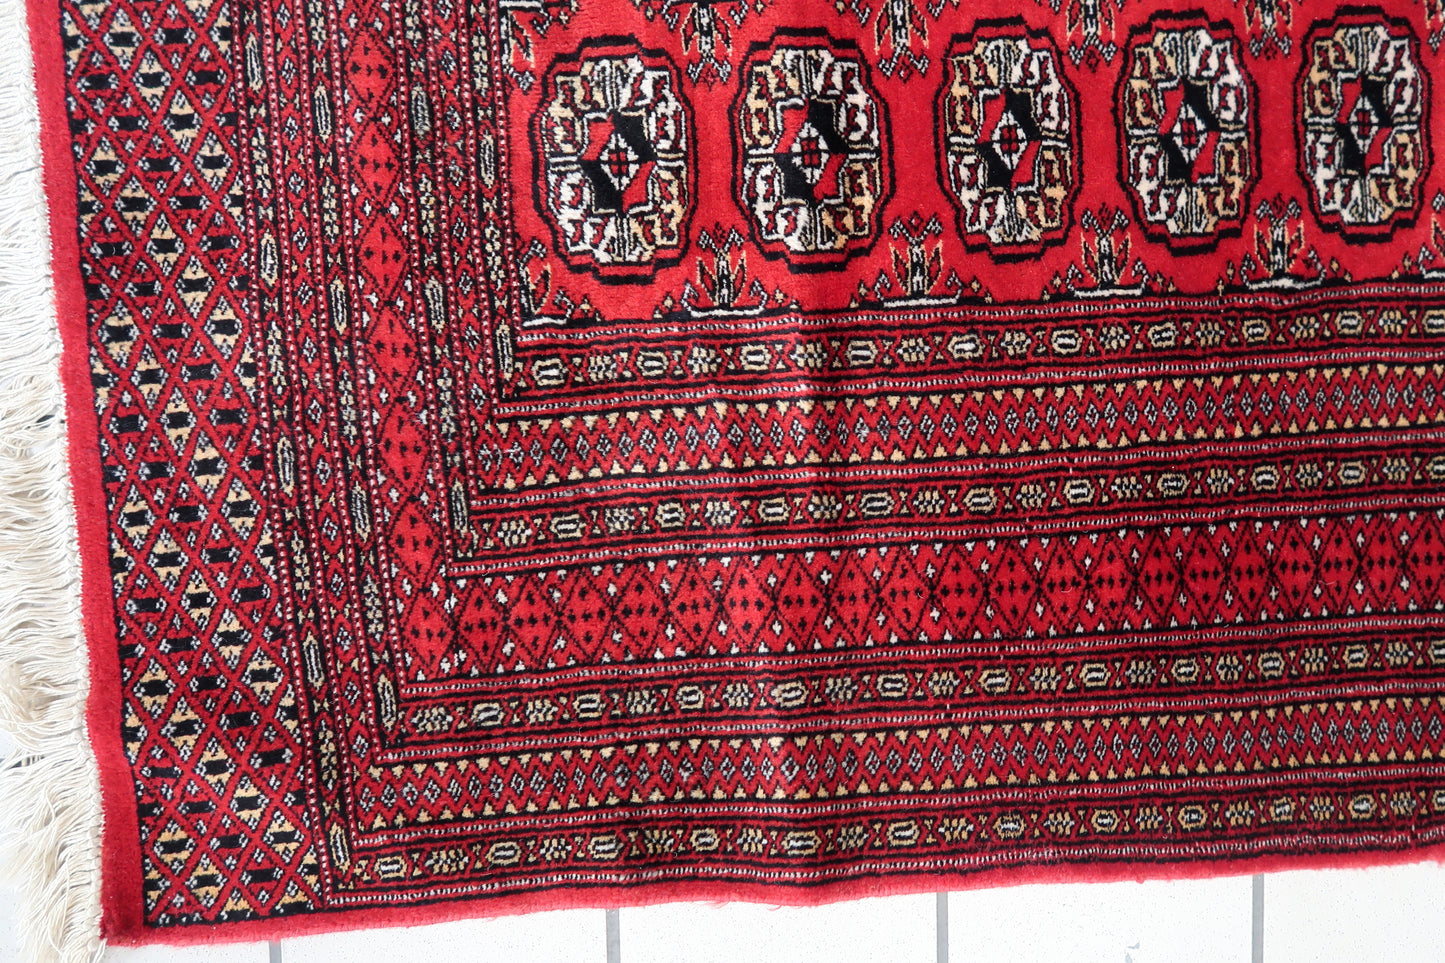 Close-up of Intricate Elephant Foot Design on Bukhara Rug